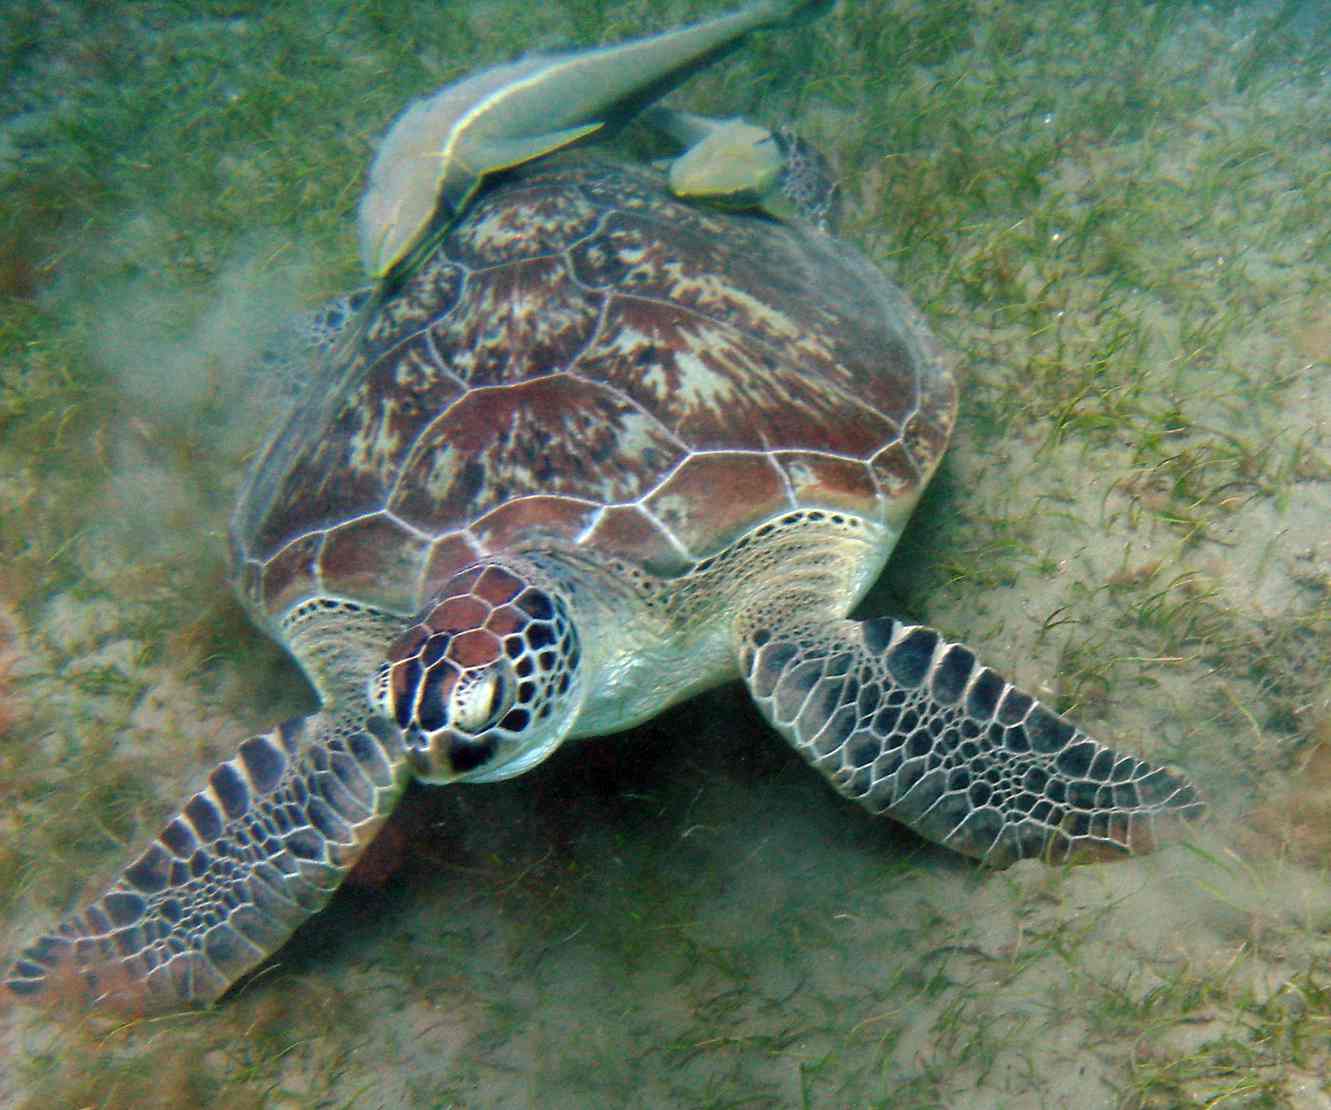 Turtle - Is it a green or what type?